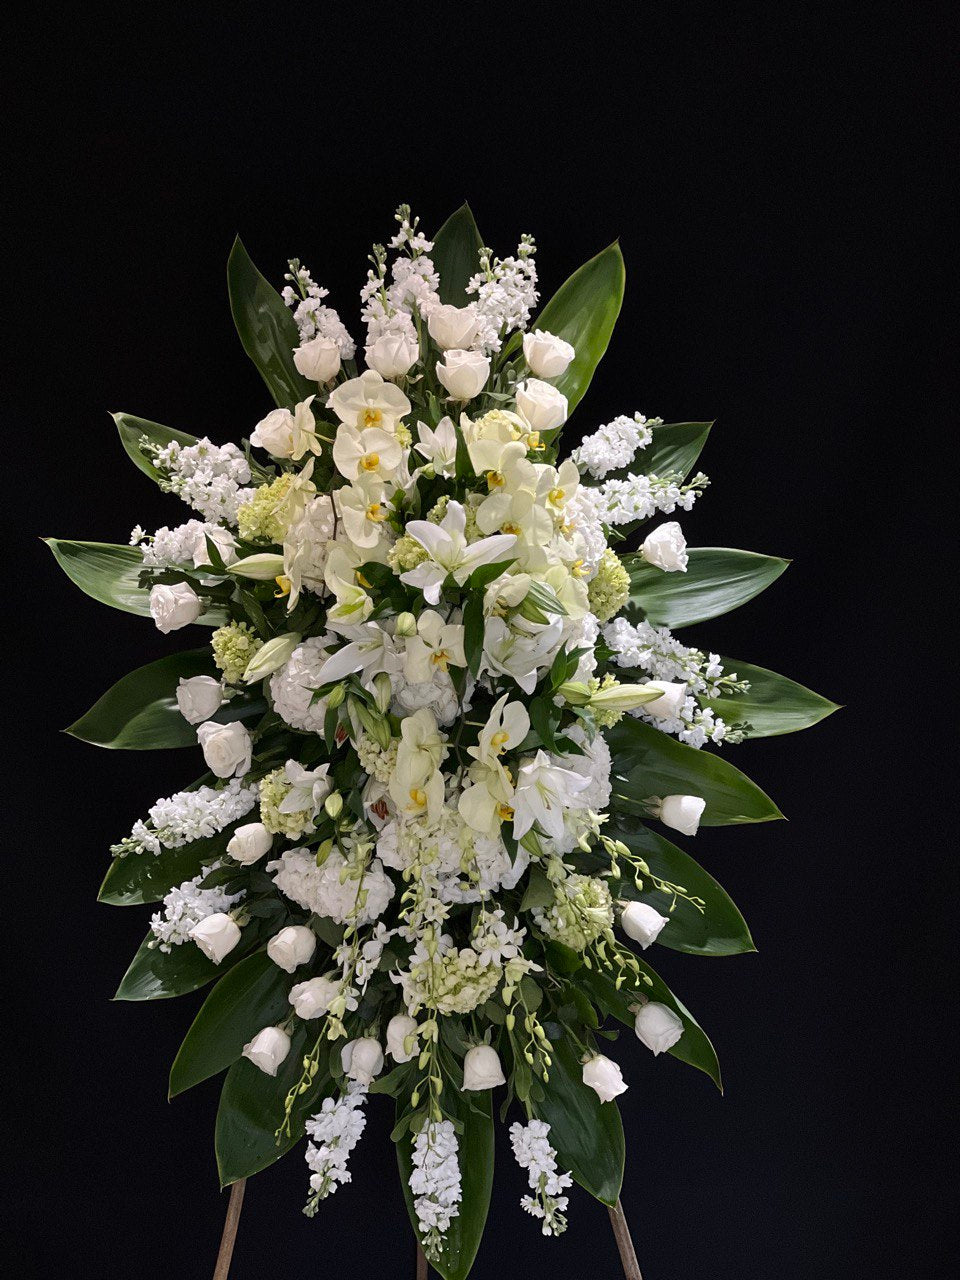 Elegant Remembrance Standing Spray, Floral Standing Spray, all white spray of roses, orchids and stocks